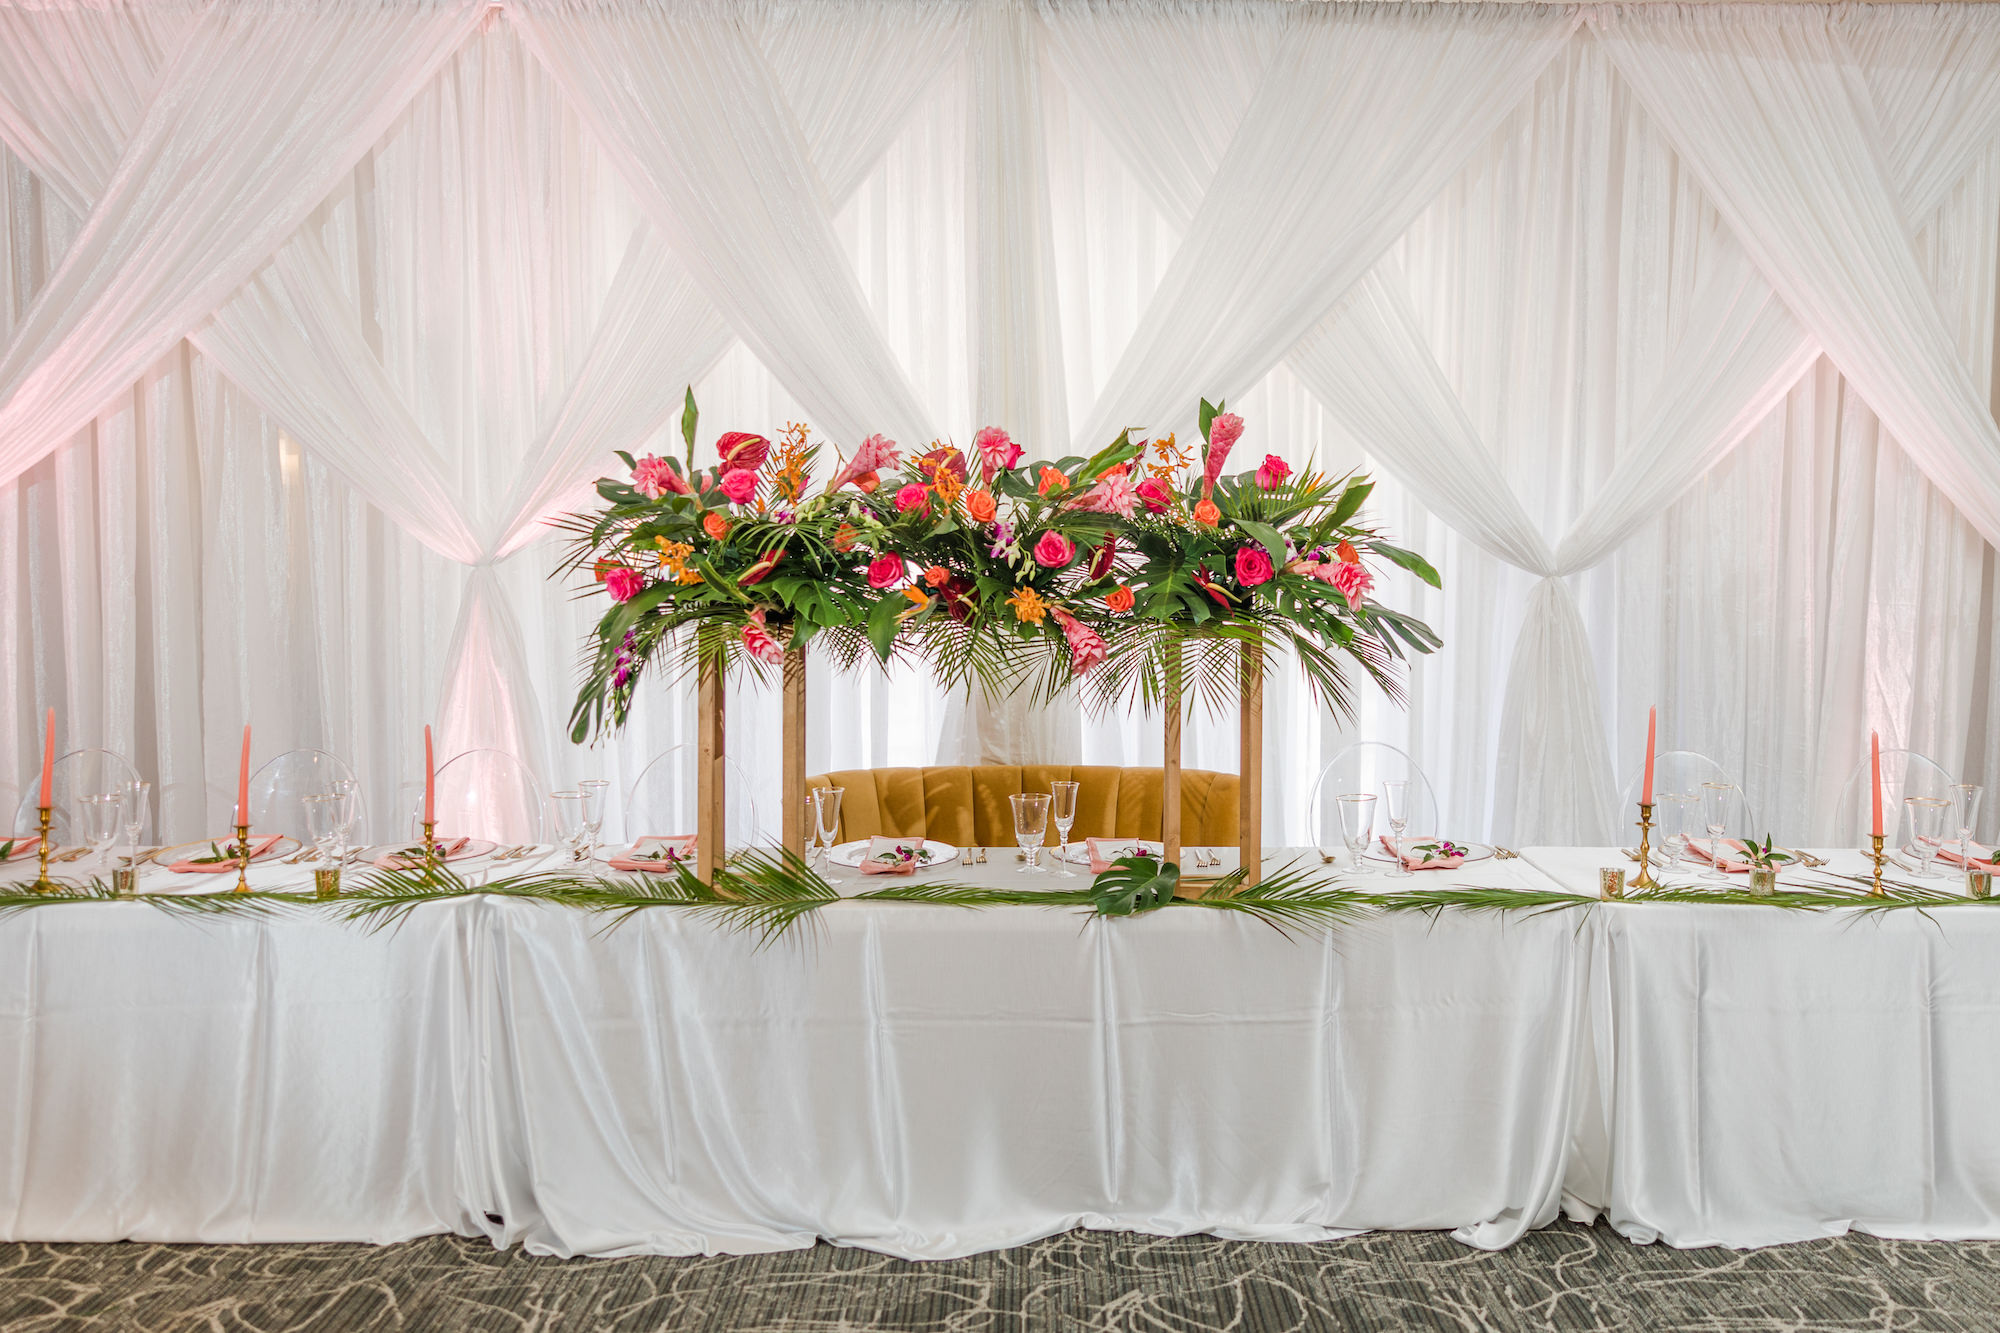 Tropical Pink and Orange Wedding Reception Inspiration with Long Feasting Head Sweetheart Table | Pink Taper Candles | Tampa Bay Florist Save the Date Florida | Planner Kelci Leigh Events